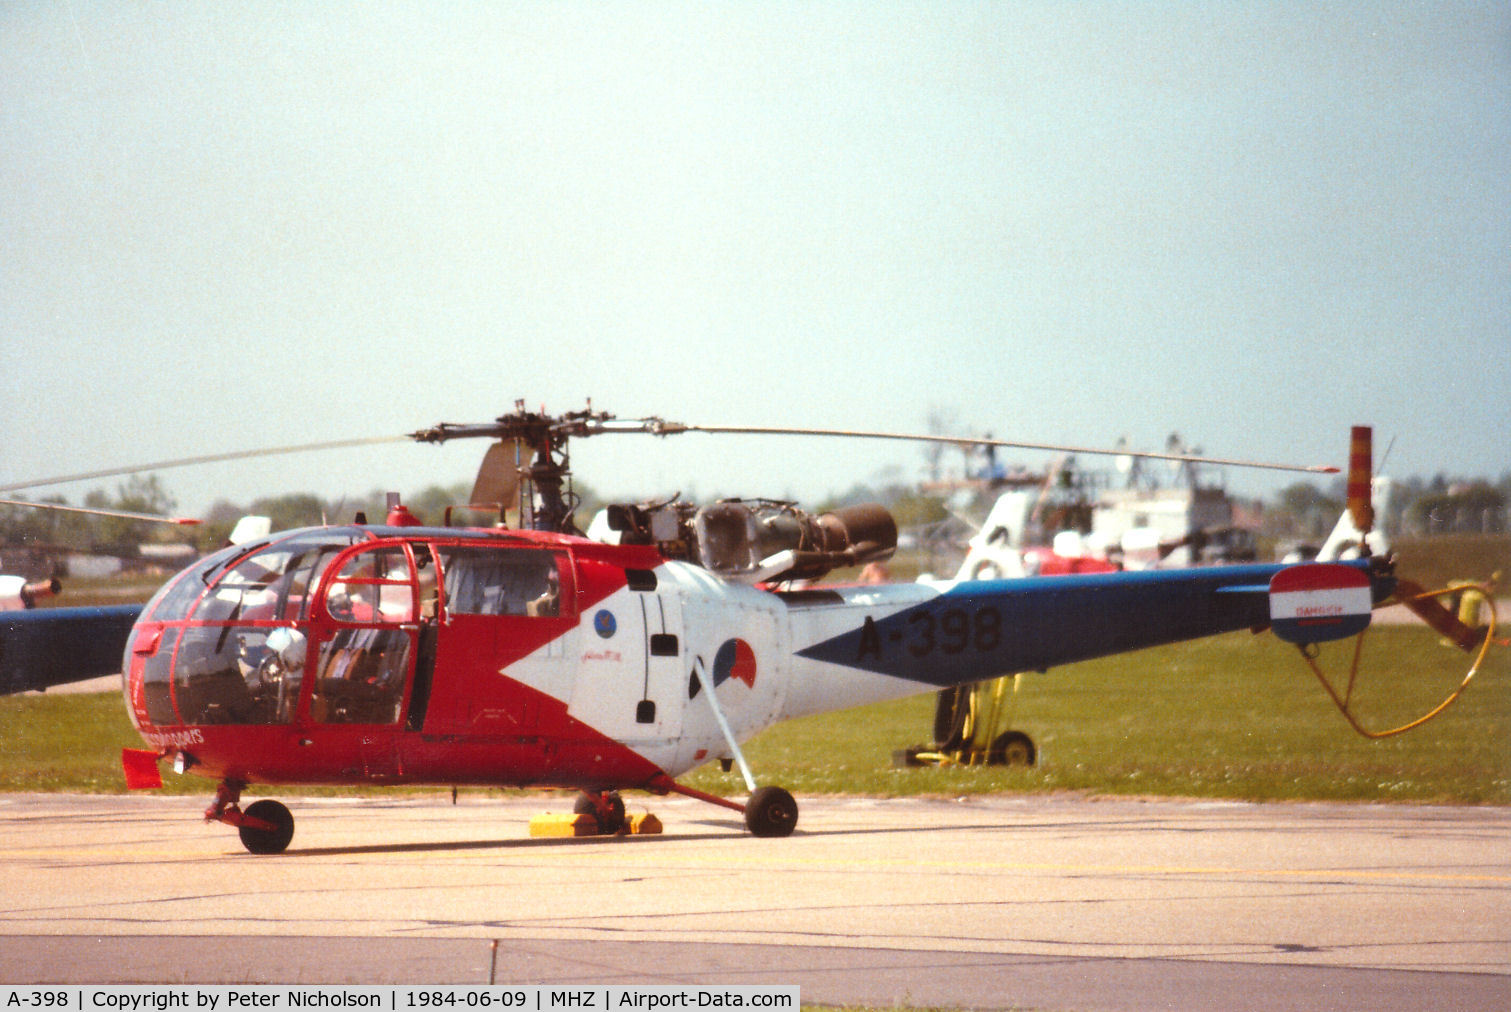 A-398, 1966 Sud Aviation SE-3160 Alouette III C/N 1398, Alouette III of the Royal Netherlands Air Force's Grasshoppers display team on the flight-line at the 1984 RAF Mildenhall Air Fete.